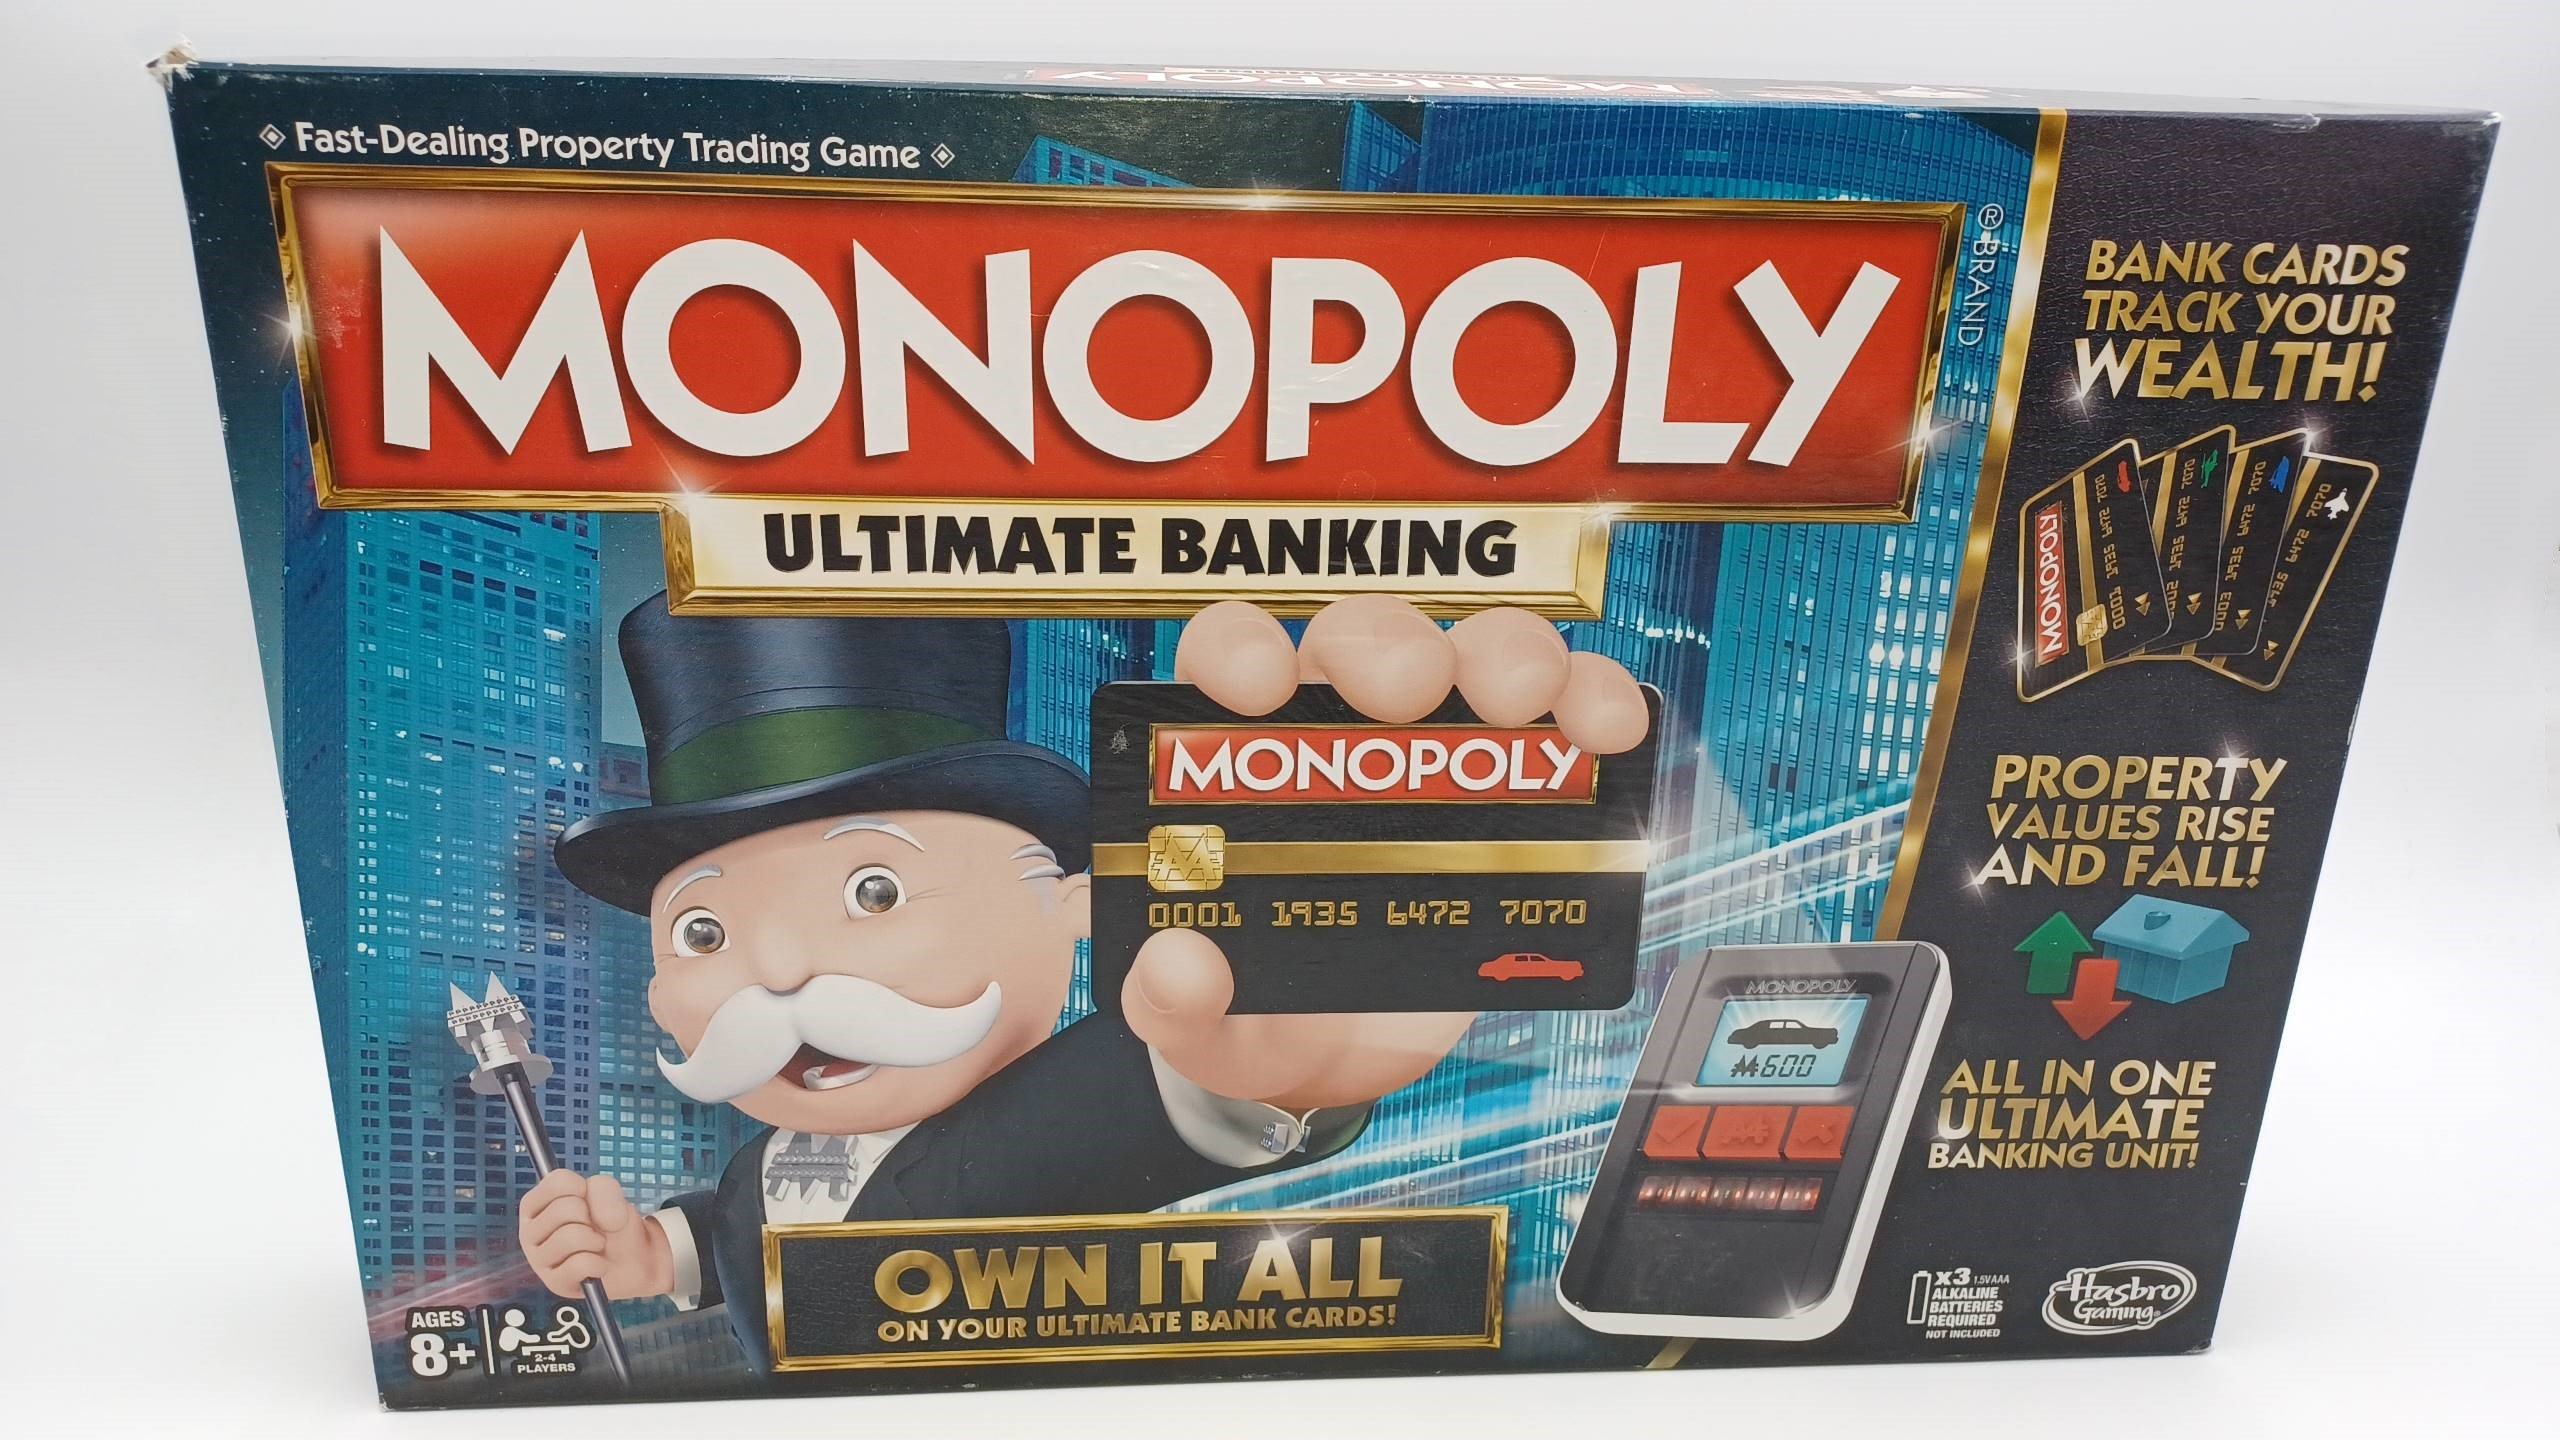 Box for Monopoly Ultimate Banking